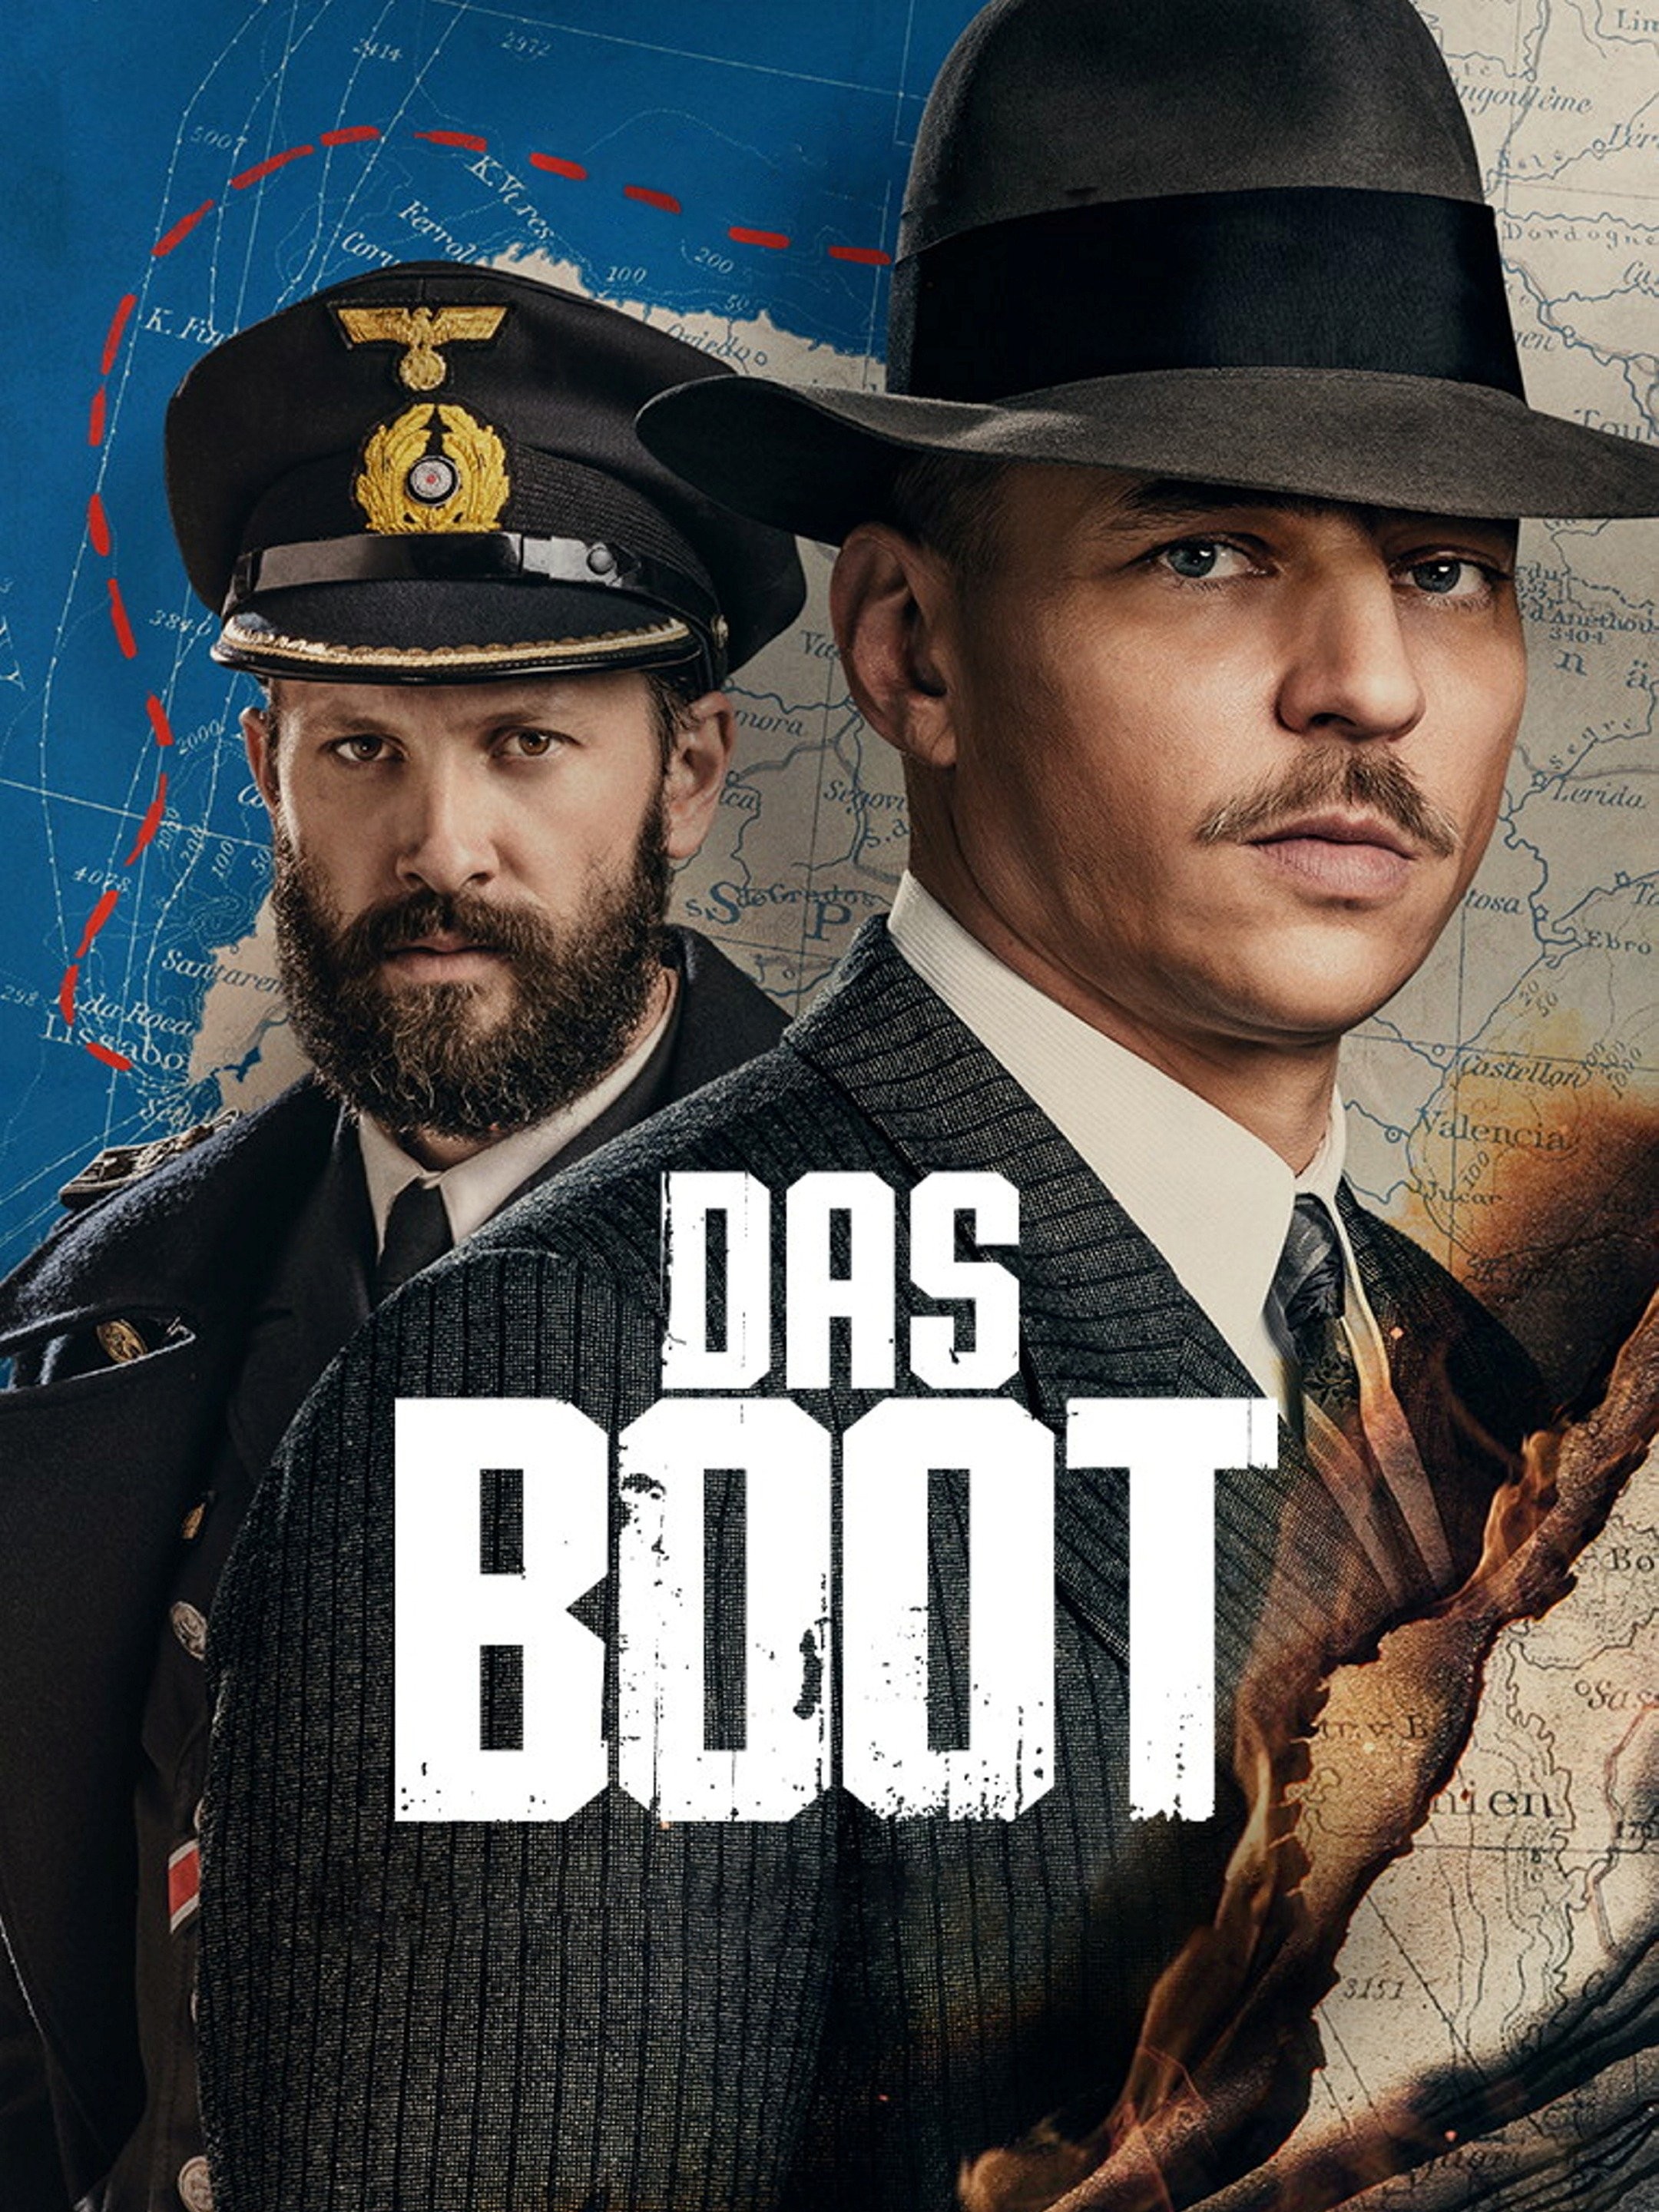 Das Boot  Rotten Tomatoes